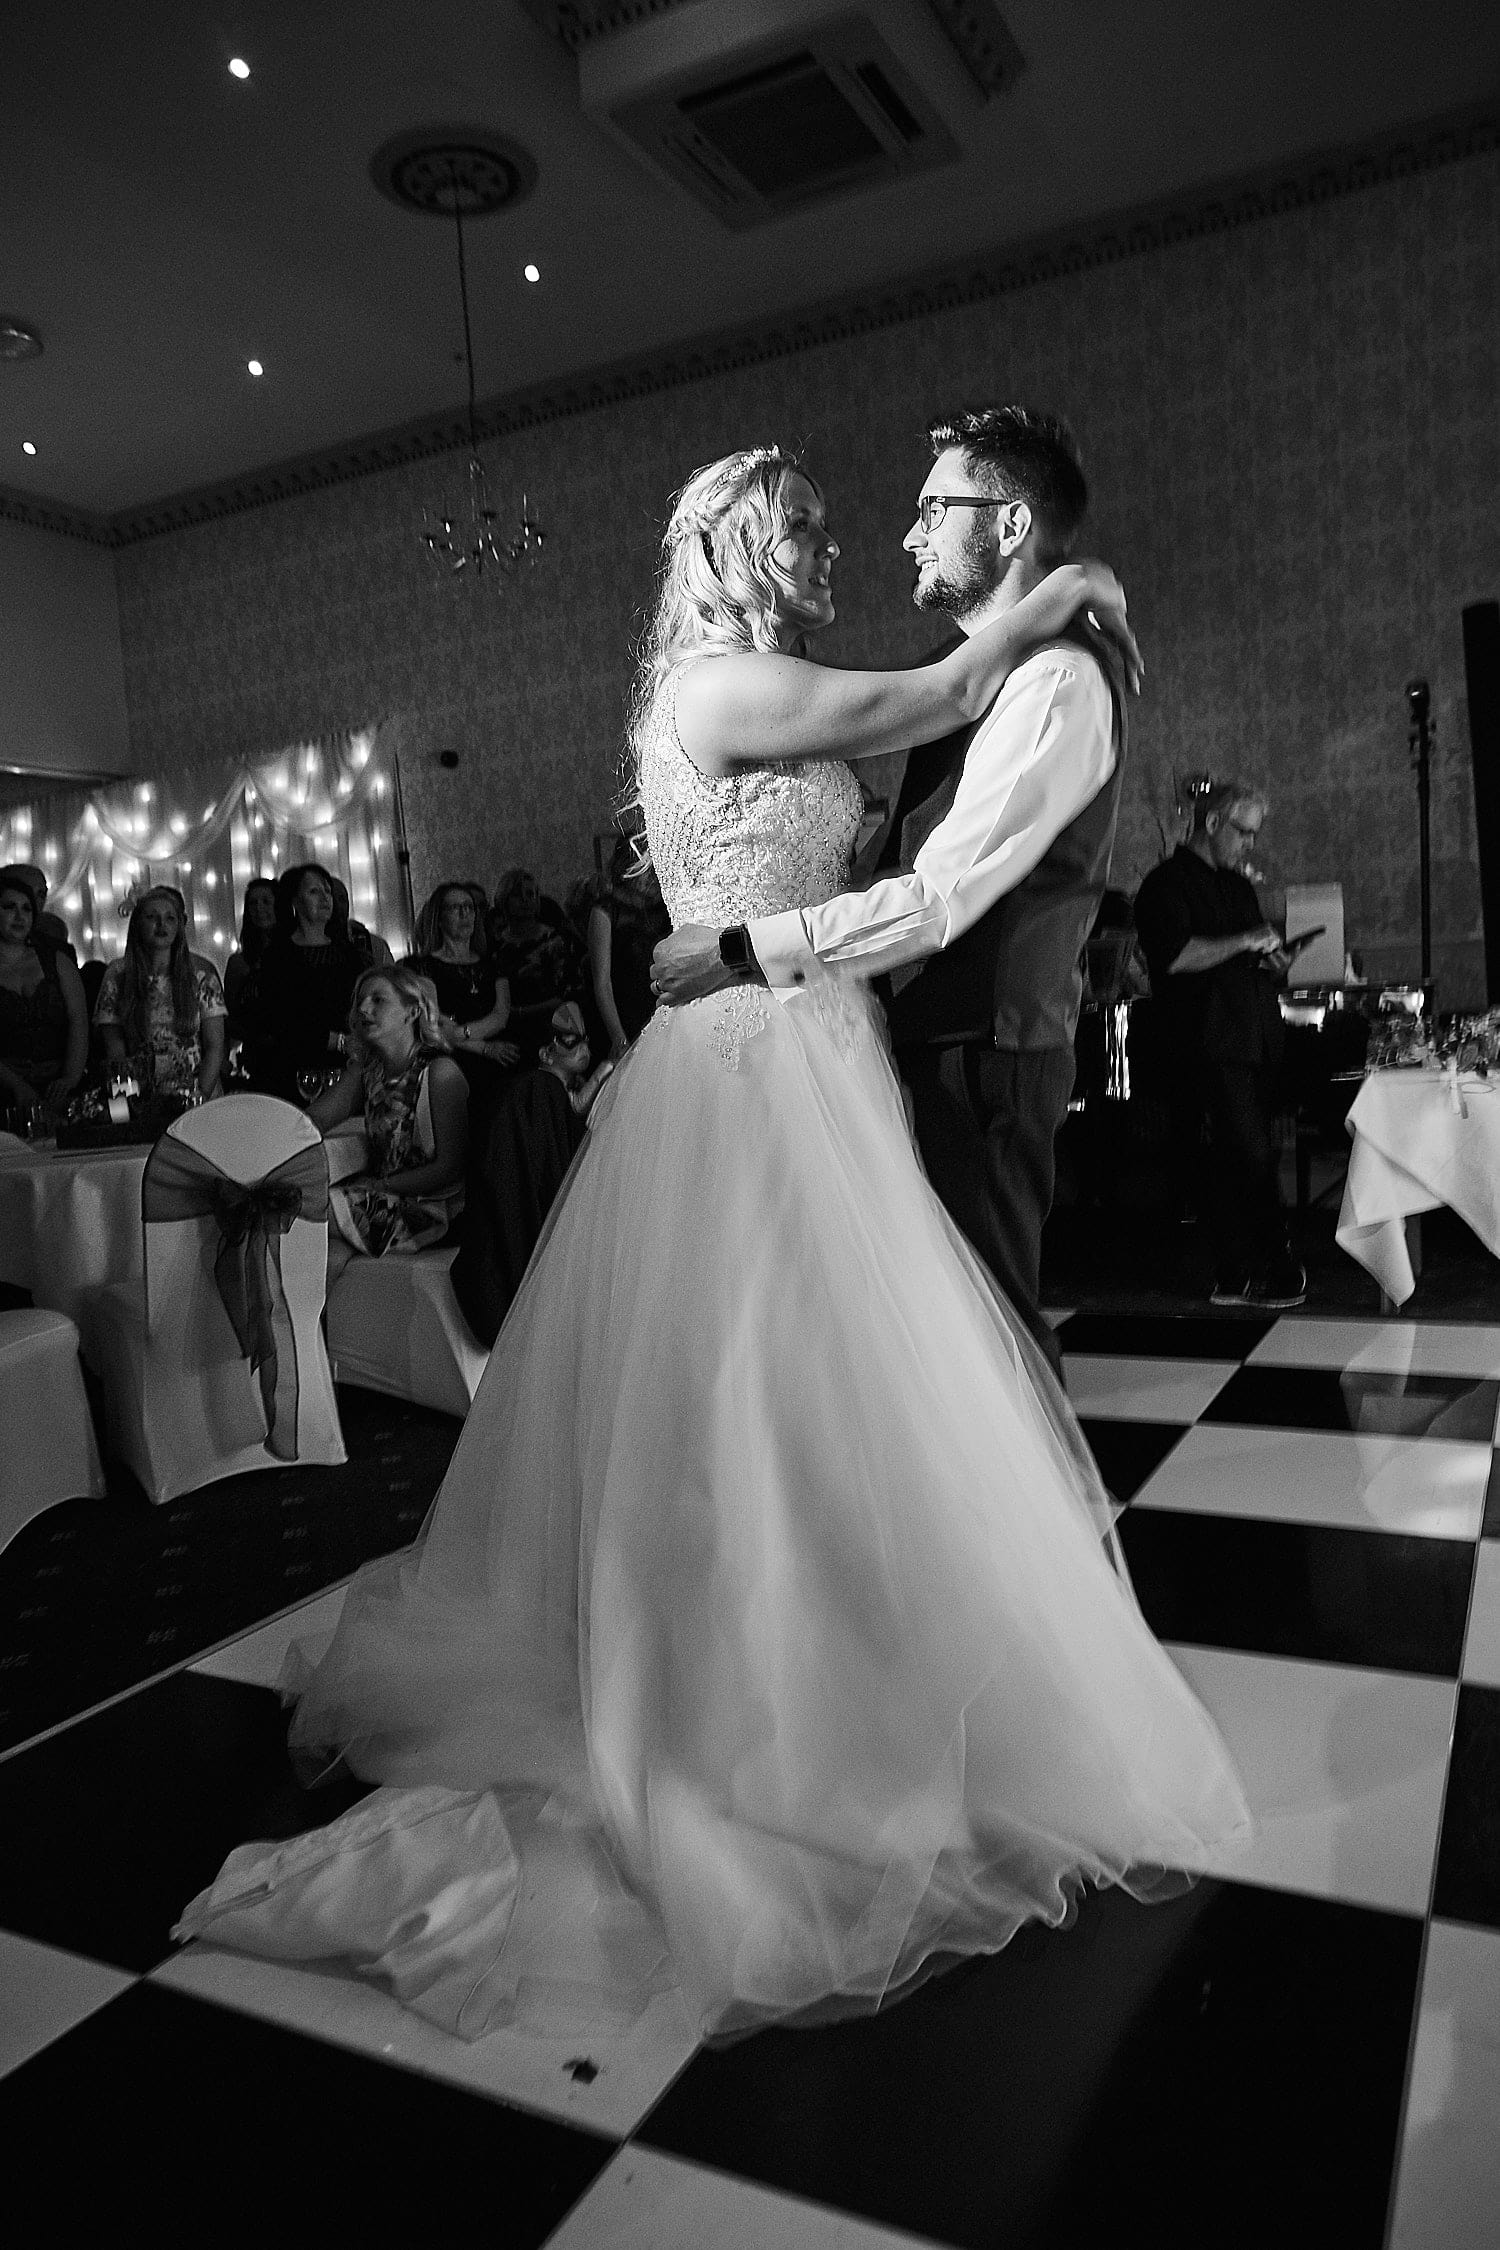 A bride and groom share their first dance on their wedding day